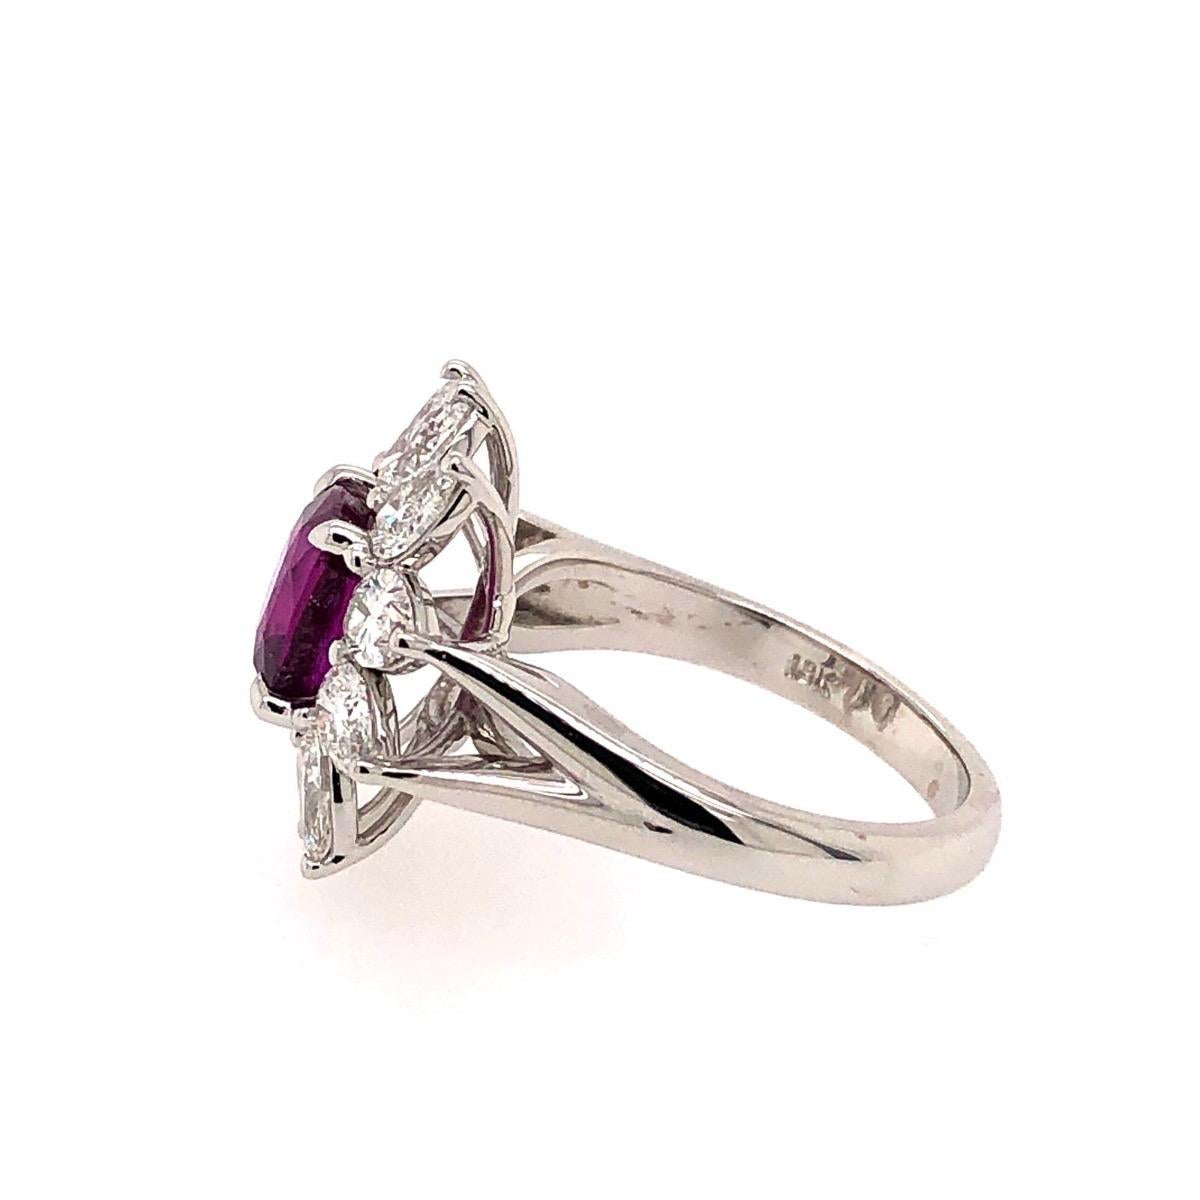 Style: Ruby Ring with White Diamonds 

Metal type:  18kt White Gold 

1 2.56ct Cushion Purplish-Pink Ruby

10 total 1.90ct Pear Shapes 
  
Location Of Stone: Madagascar   

Has 1 GRS Certificate. GRS Number: GRS2018-056548